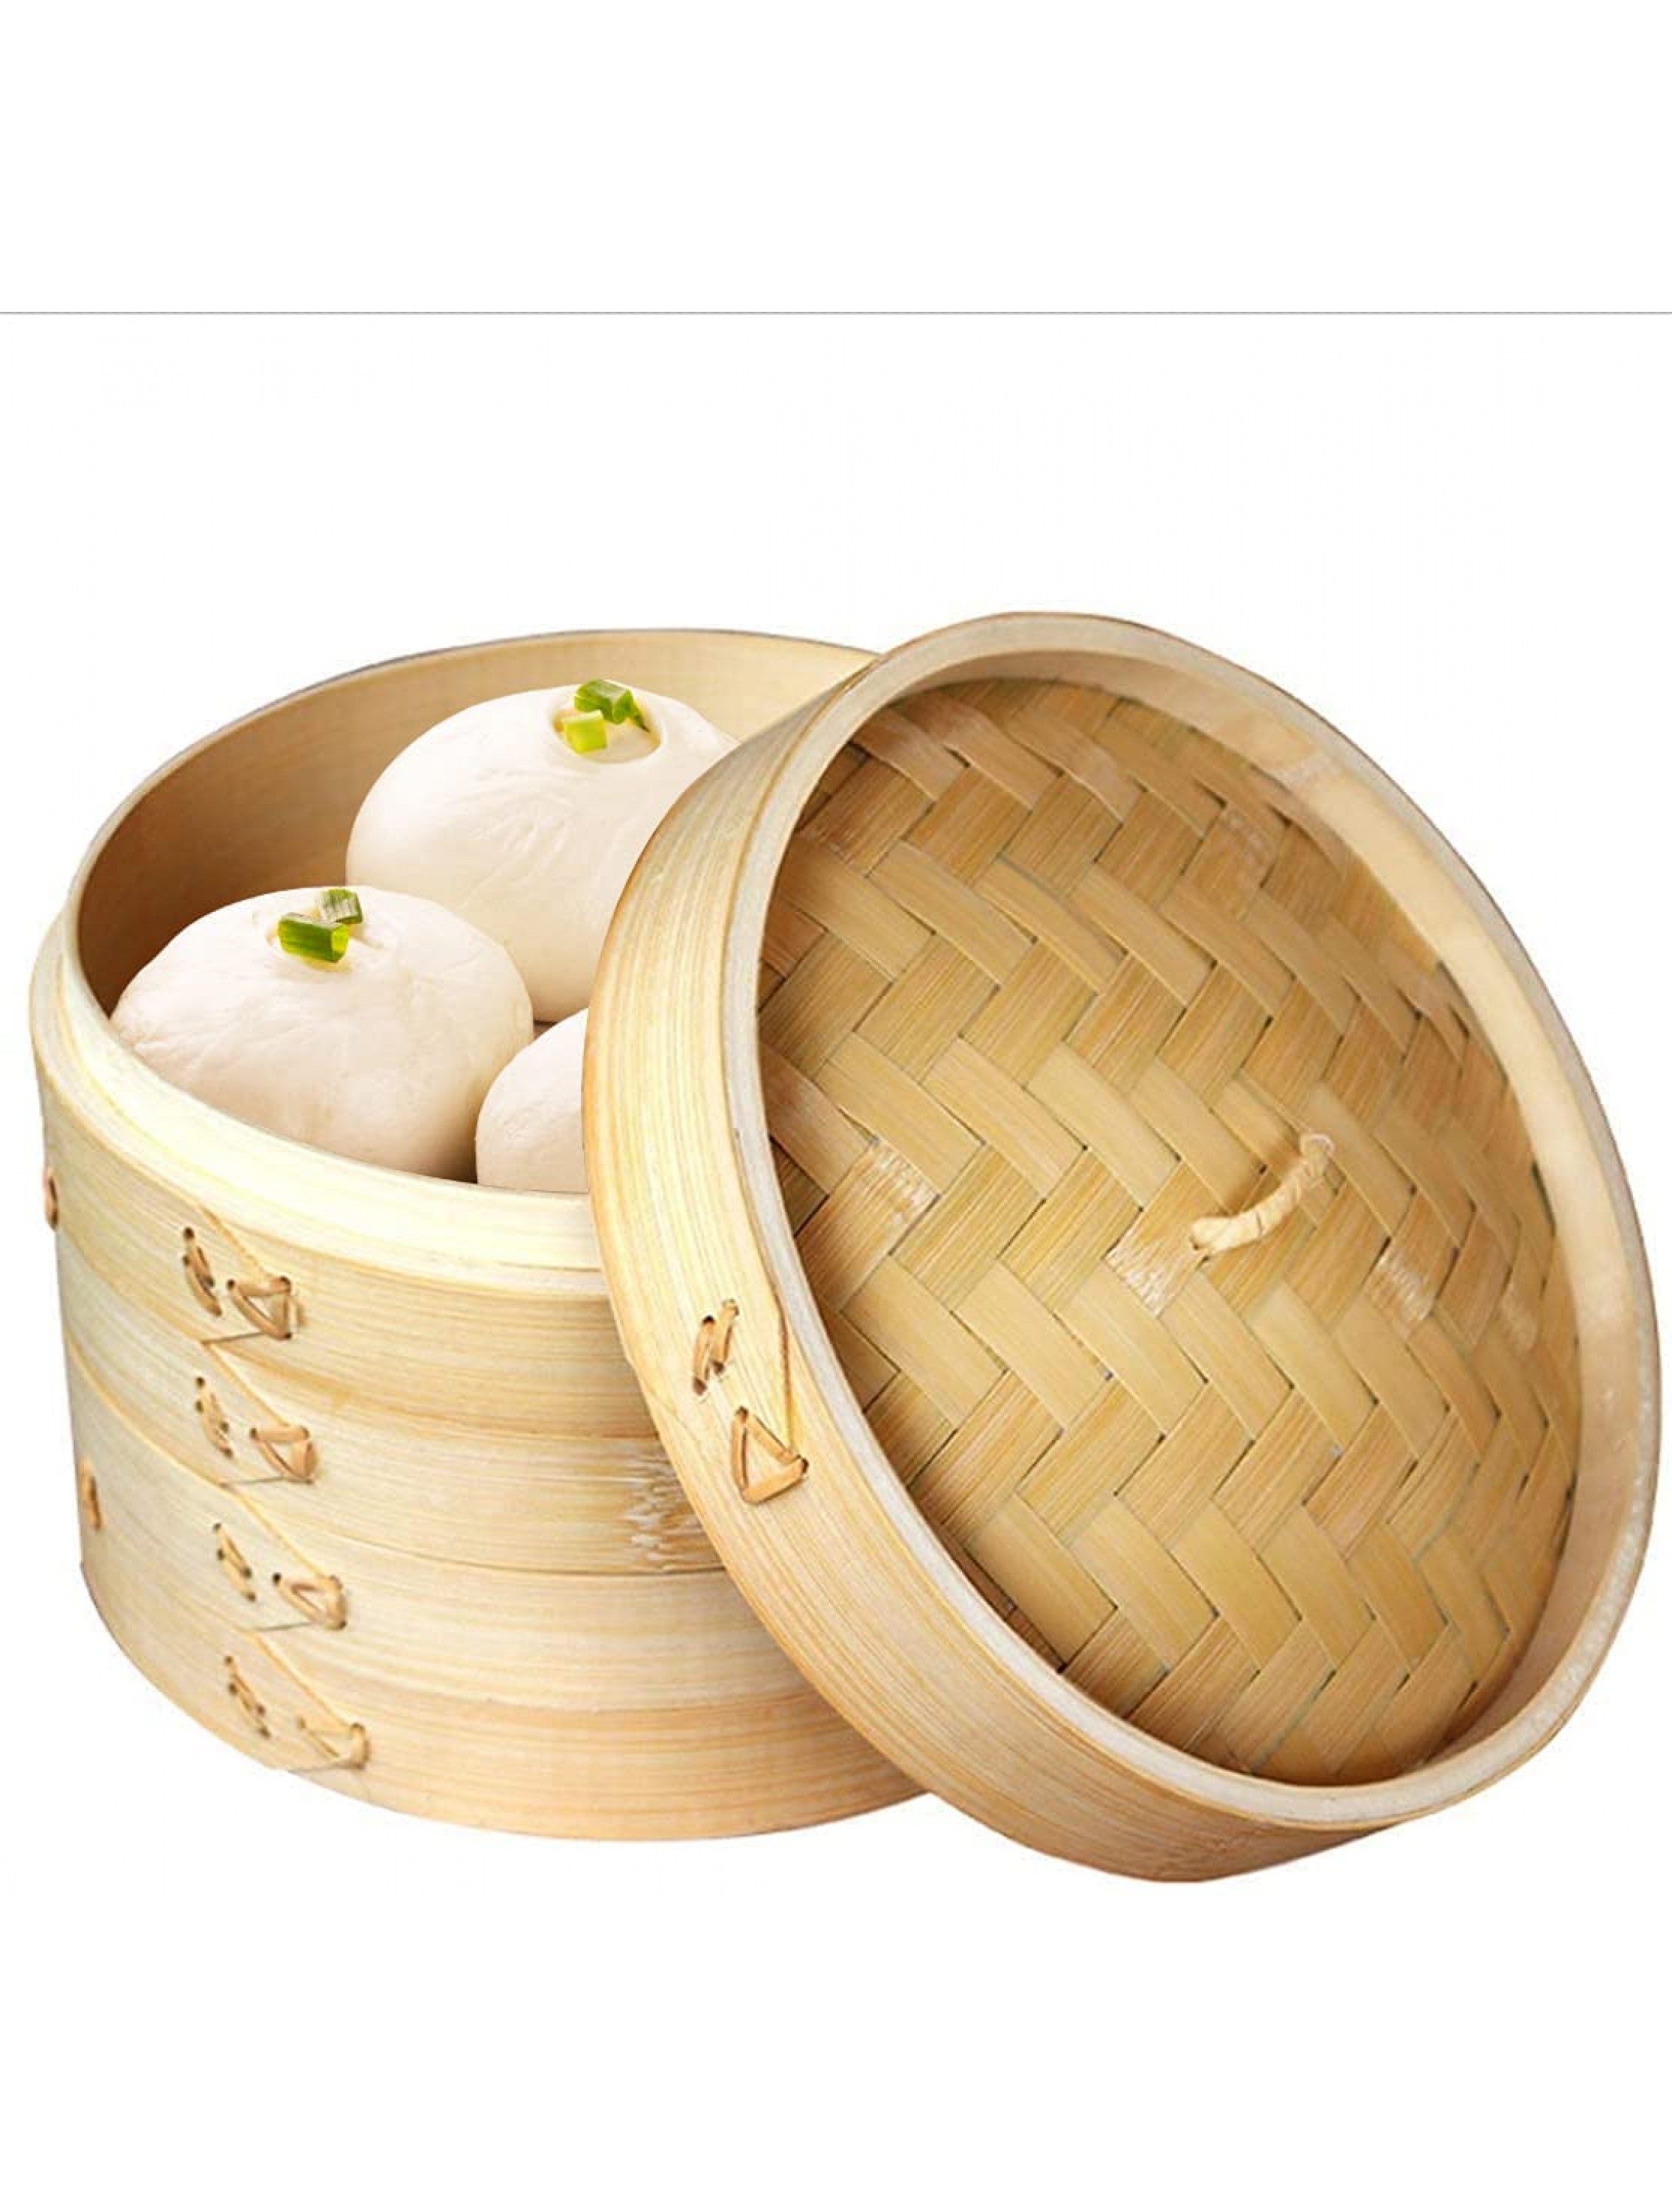 Bamboo Steamer 10 Inch 2 Tiers Chinese Food Steamers Traditional Design Healthy Cooking for dumplings vegetables chicken fish Handmade Steam Basket Included 2 Gauze Liners and Chopsticks - BNQMPM23M